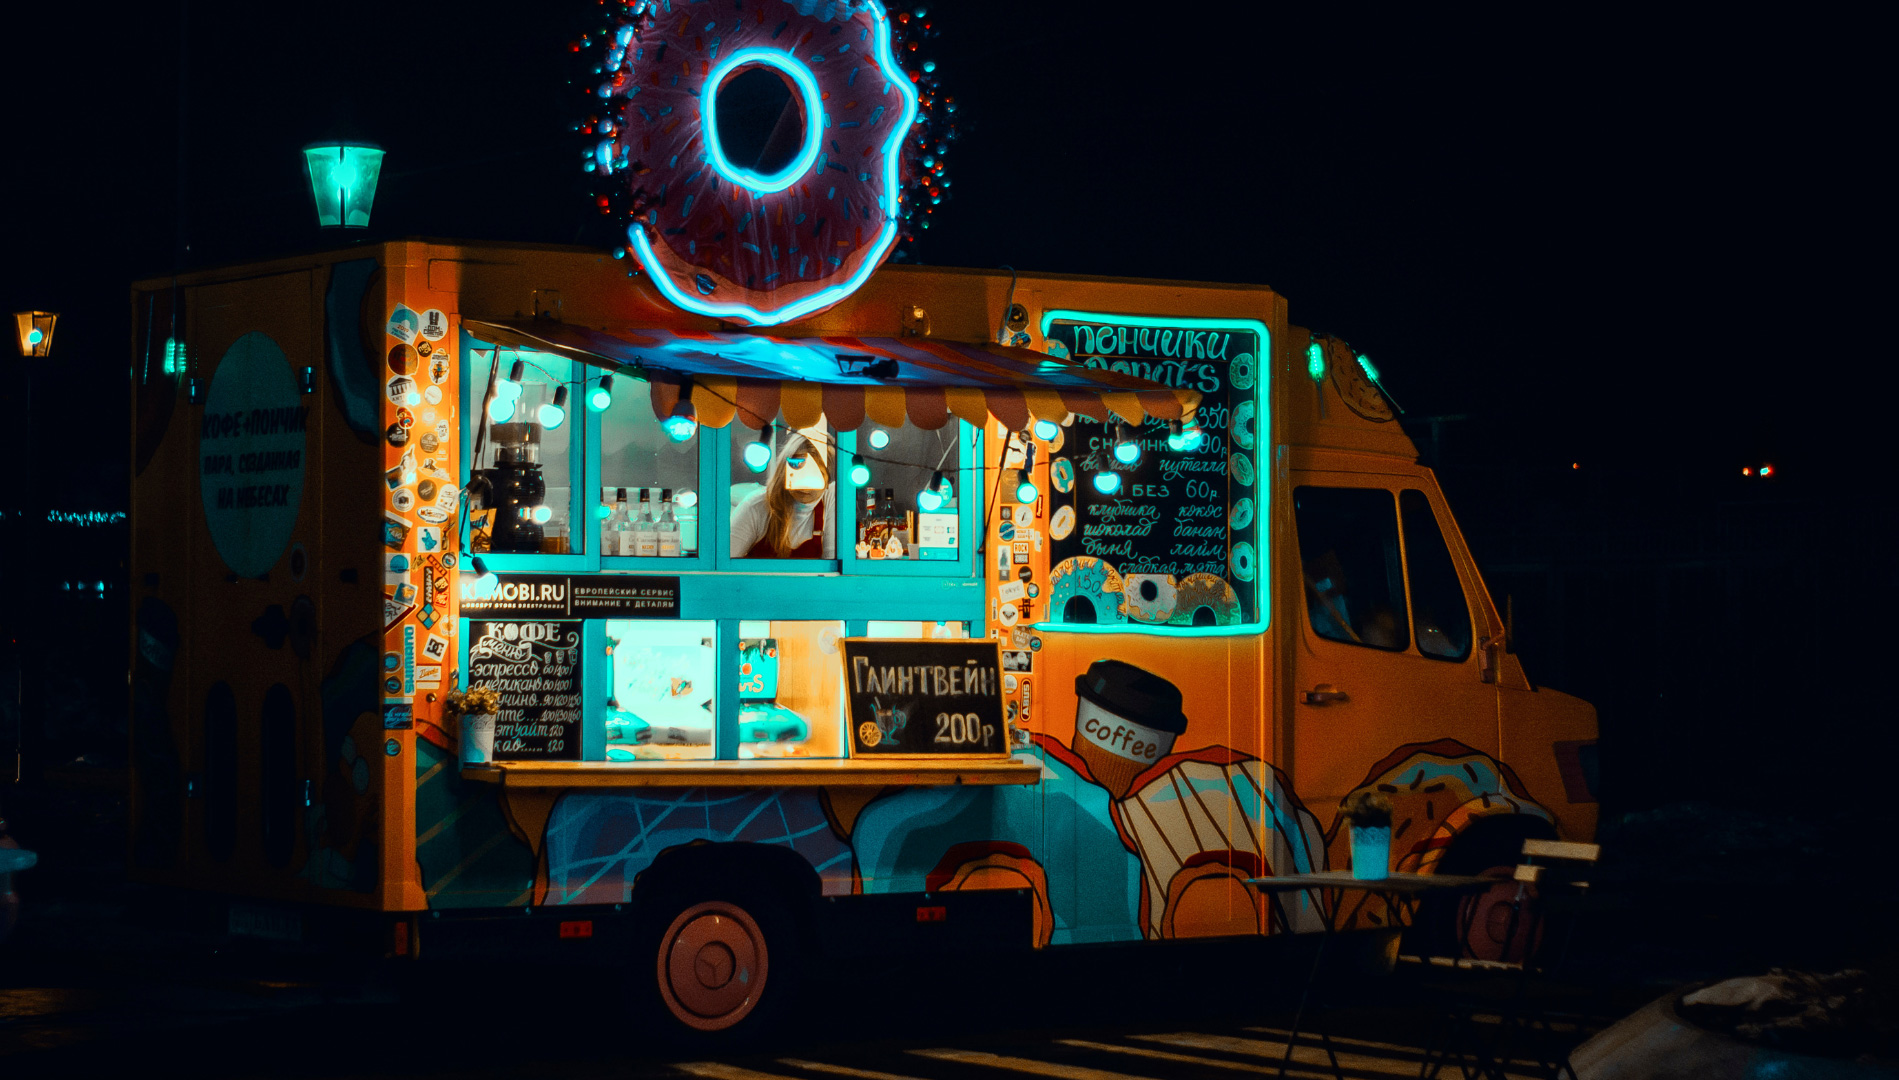 Where Should You Park Your Food Truck Overnight?